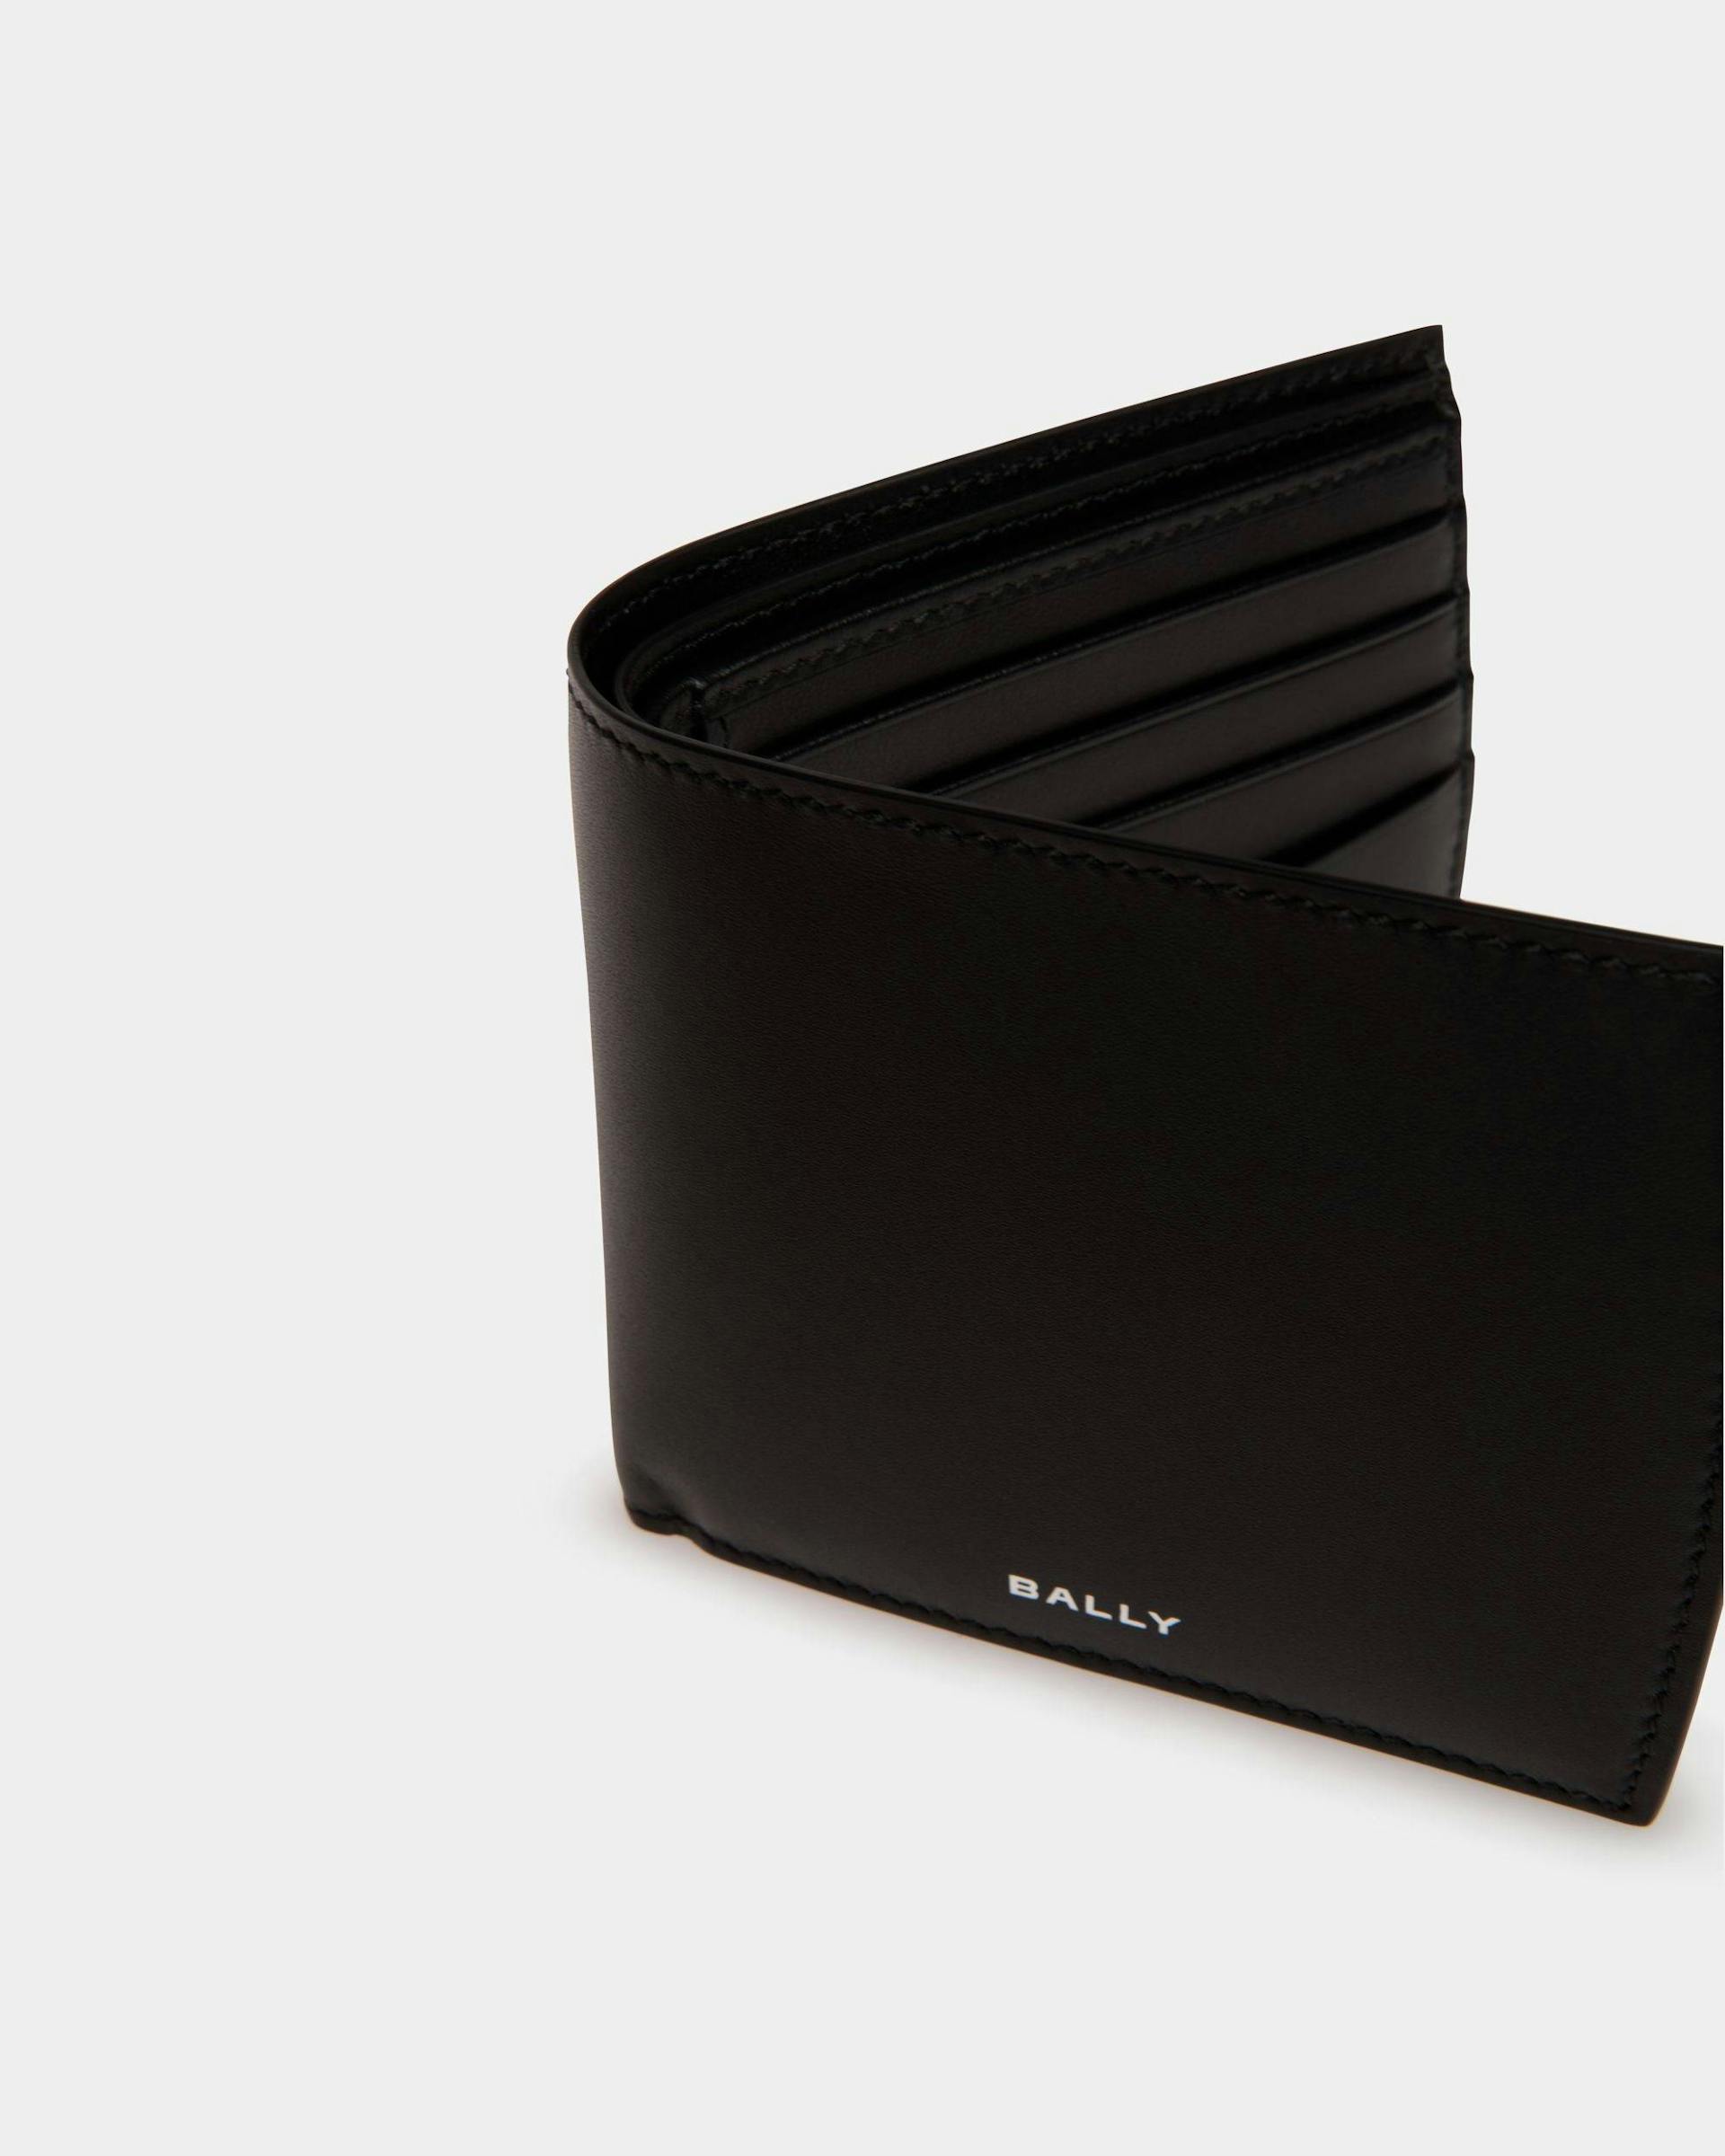 Men's Busy Bally Bifold Wallet in Black Leather | Bally | Still Life Detail